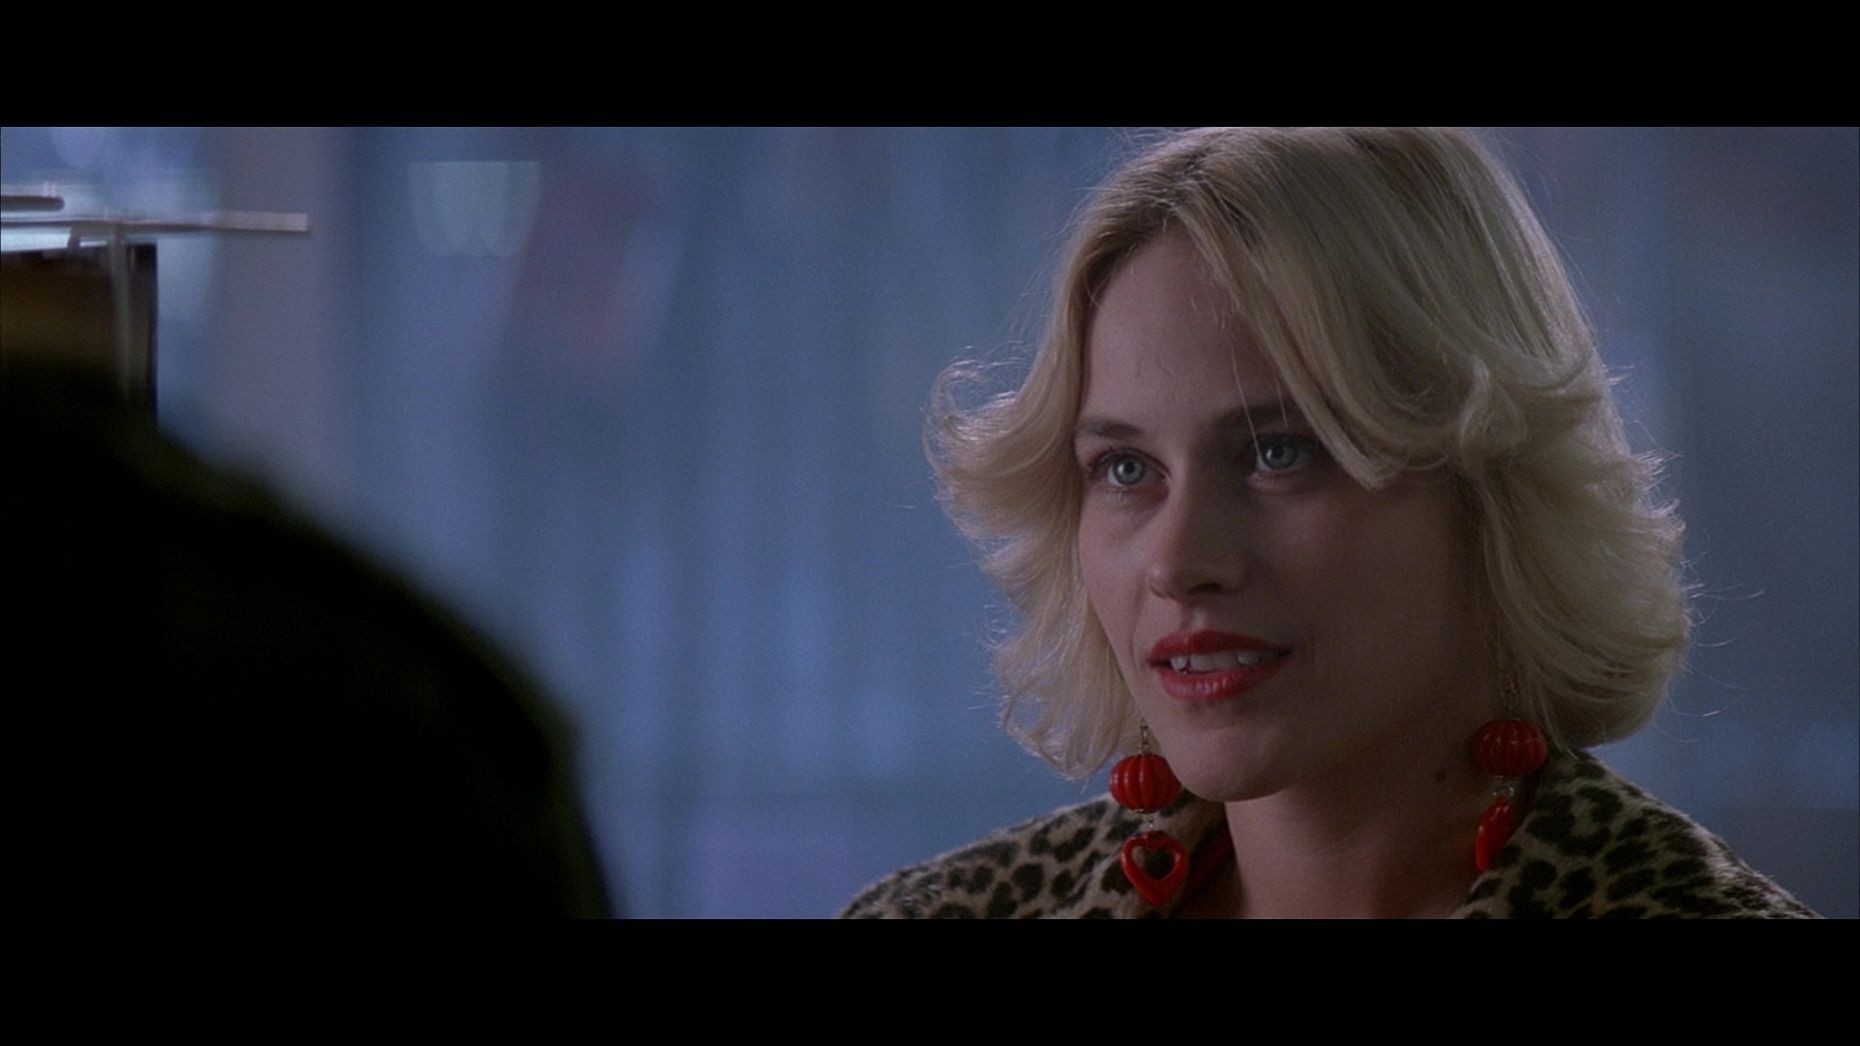 <p>Patricia Arquette plays Alabama Whitmann in Tony Scott’s <em>True Romance</em>. The film shocked audiences with its violent scenes and controversial plot typical of its screenwriter, Quentin Tarantino. A prostitute falls in love with one of her customers and they decide to steal drugs. Patricia Arquette has <a href="https://www.looper.com/810704/why-patricia-arquette-is-conflicted-about-her-iconic-role-in-true-romance-exclusive/" rel="noreferrer noopener">confessed that she finds</a> the character’s ambivalence and her loyalty to her criminal lover disturbing. Nevertheless, the film earned the actress several nominations for best actress and <a href="https://www.joe.ie/uncategorized/cult-classic-true-romance-35016" rel="noreferrer noopener">has since gained a cult following</a>.</p>